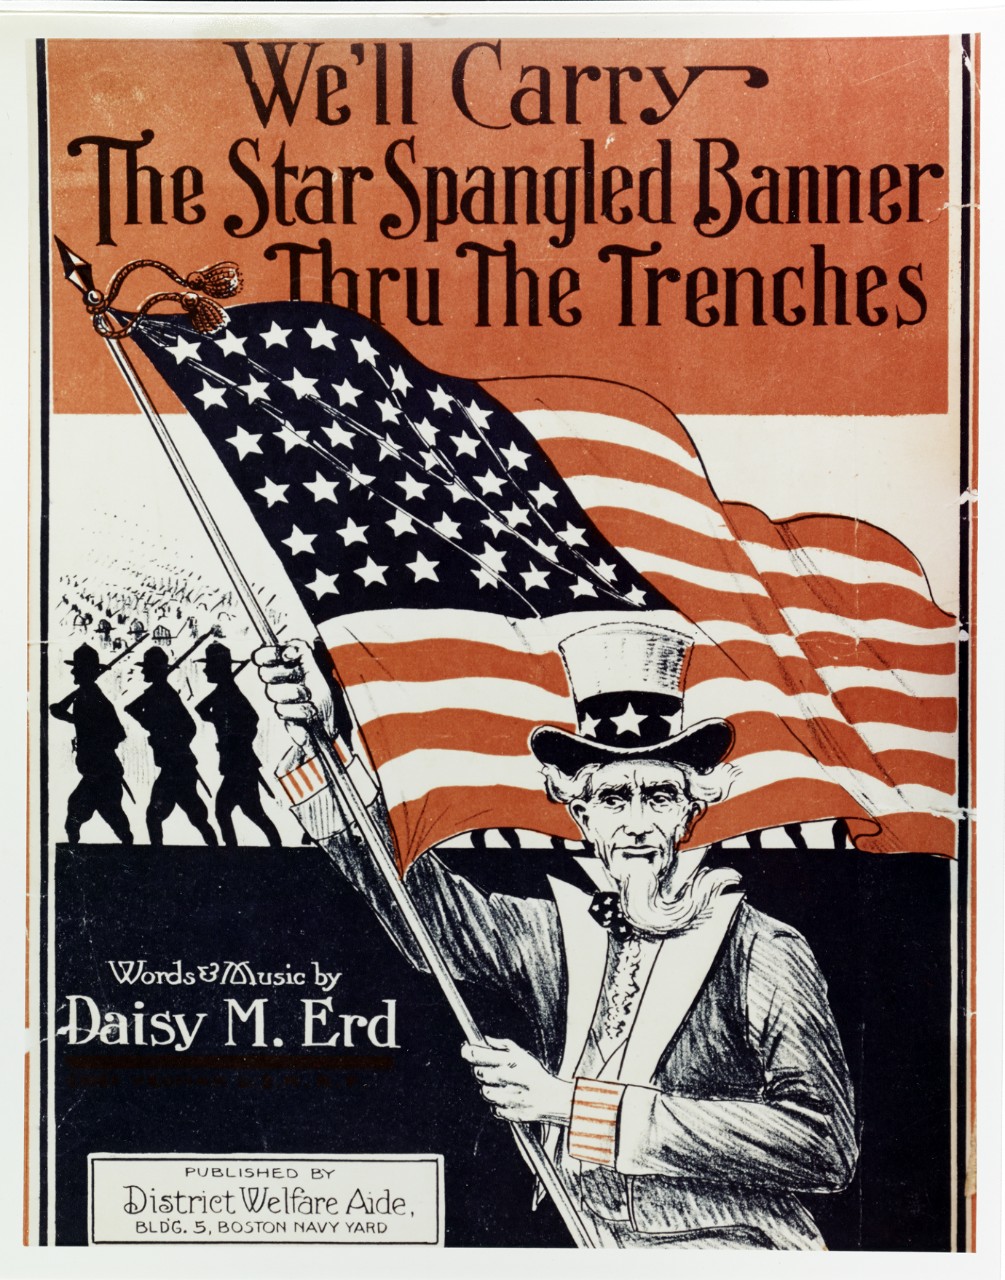 Photo #: NH 94775-KN &quot;We'll Carry the Star Spangled Banner Thru The Trenches&quot;